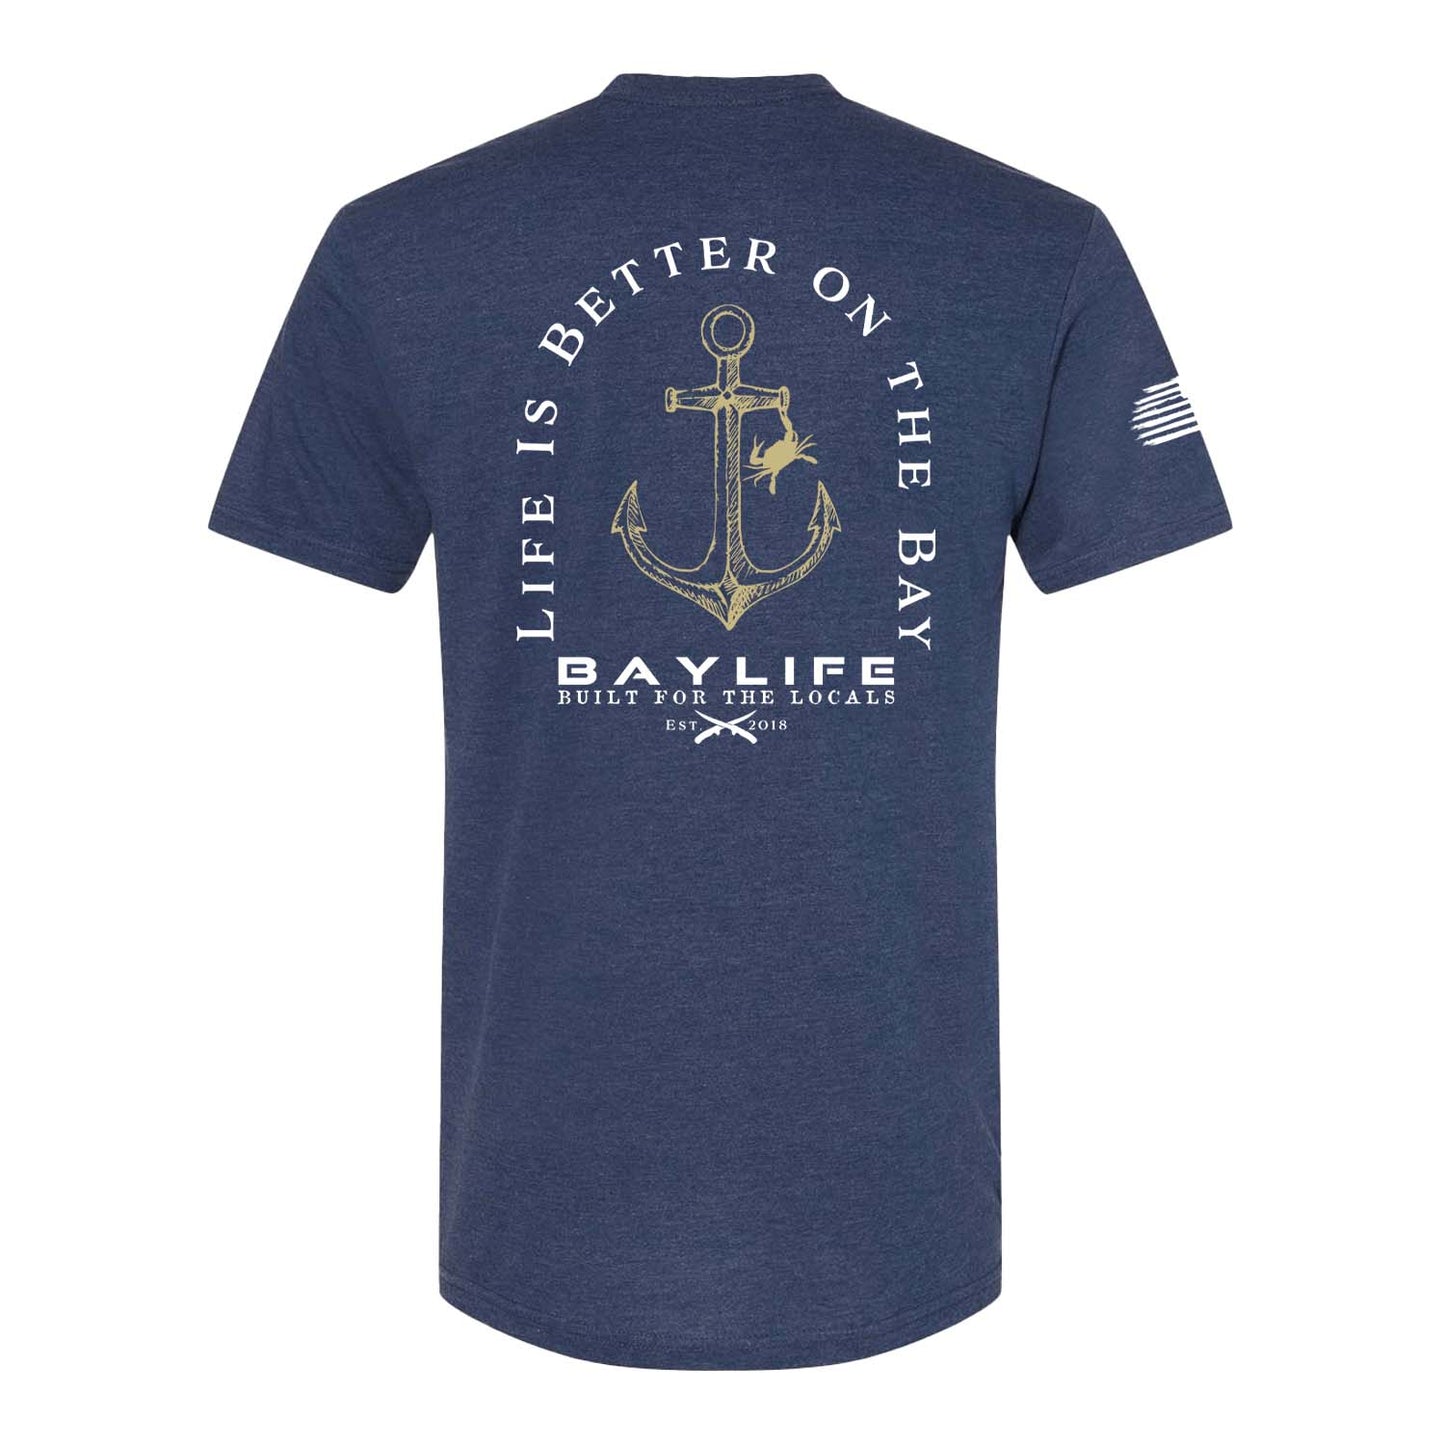 Life is Better on the Bay | Ultra Soft Short Sleeve | Navy Mist